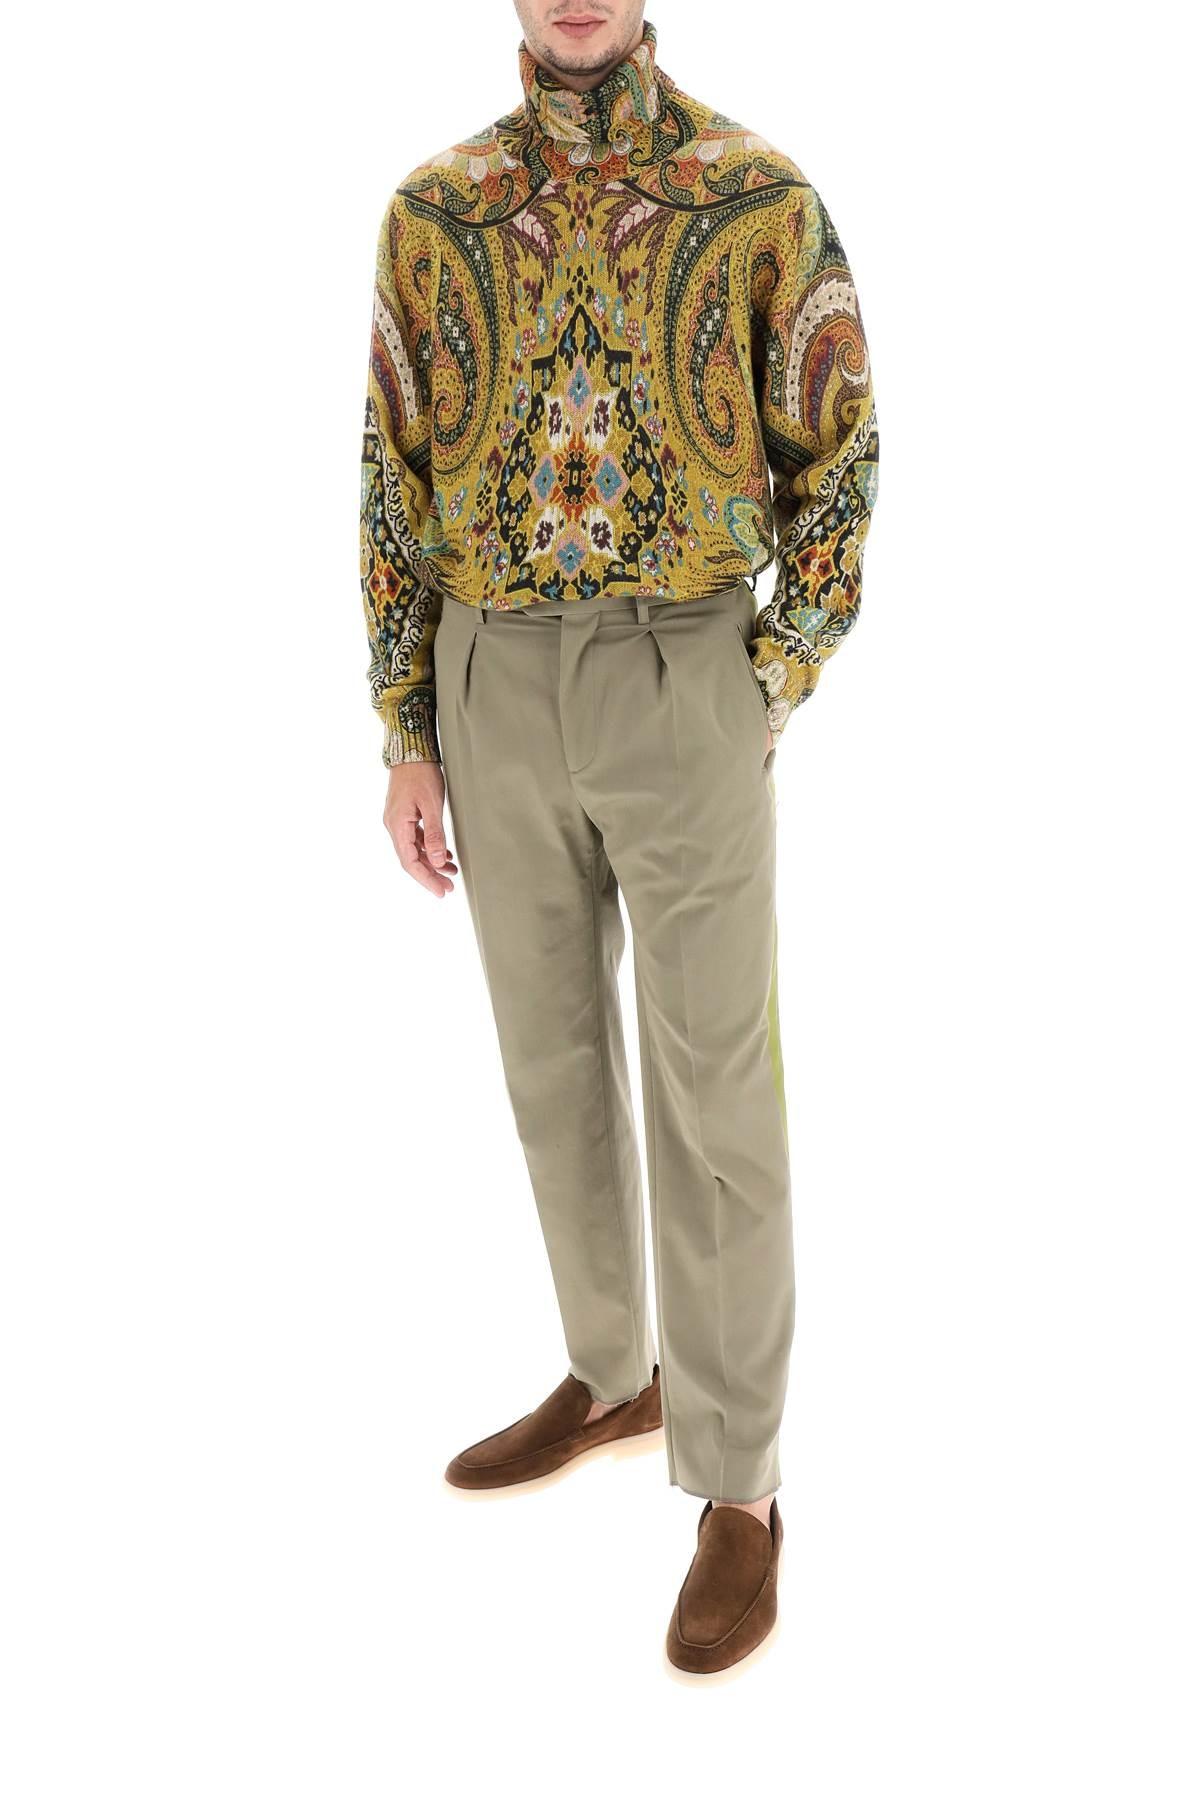 Mens Sweaters and knitwear Etro Sweaters and knitwear Etro Paisley Wool Turtleneck Sweater in Yellow,Black for Men Yellow Save 22% 